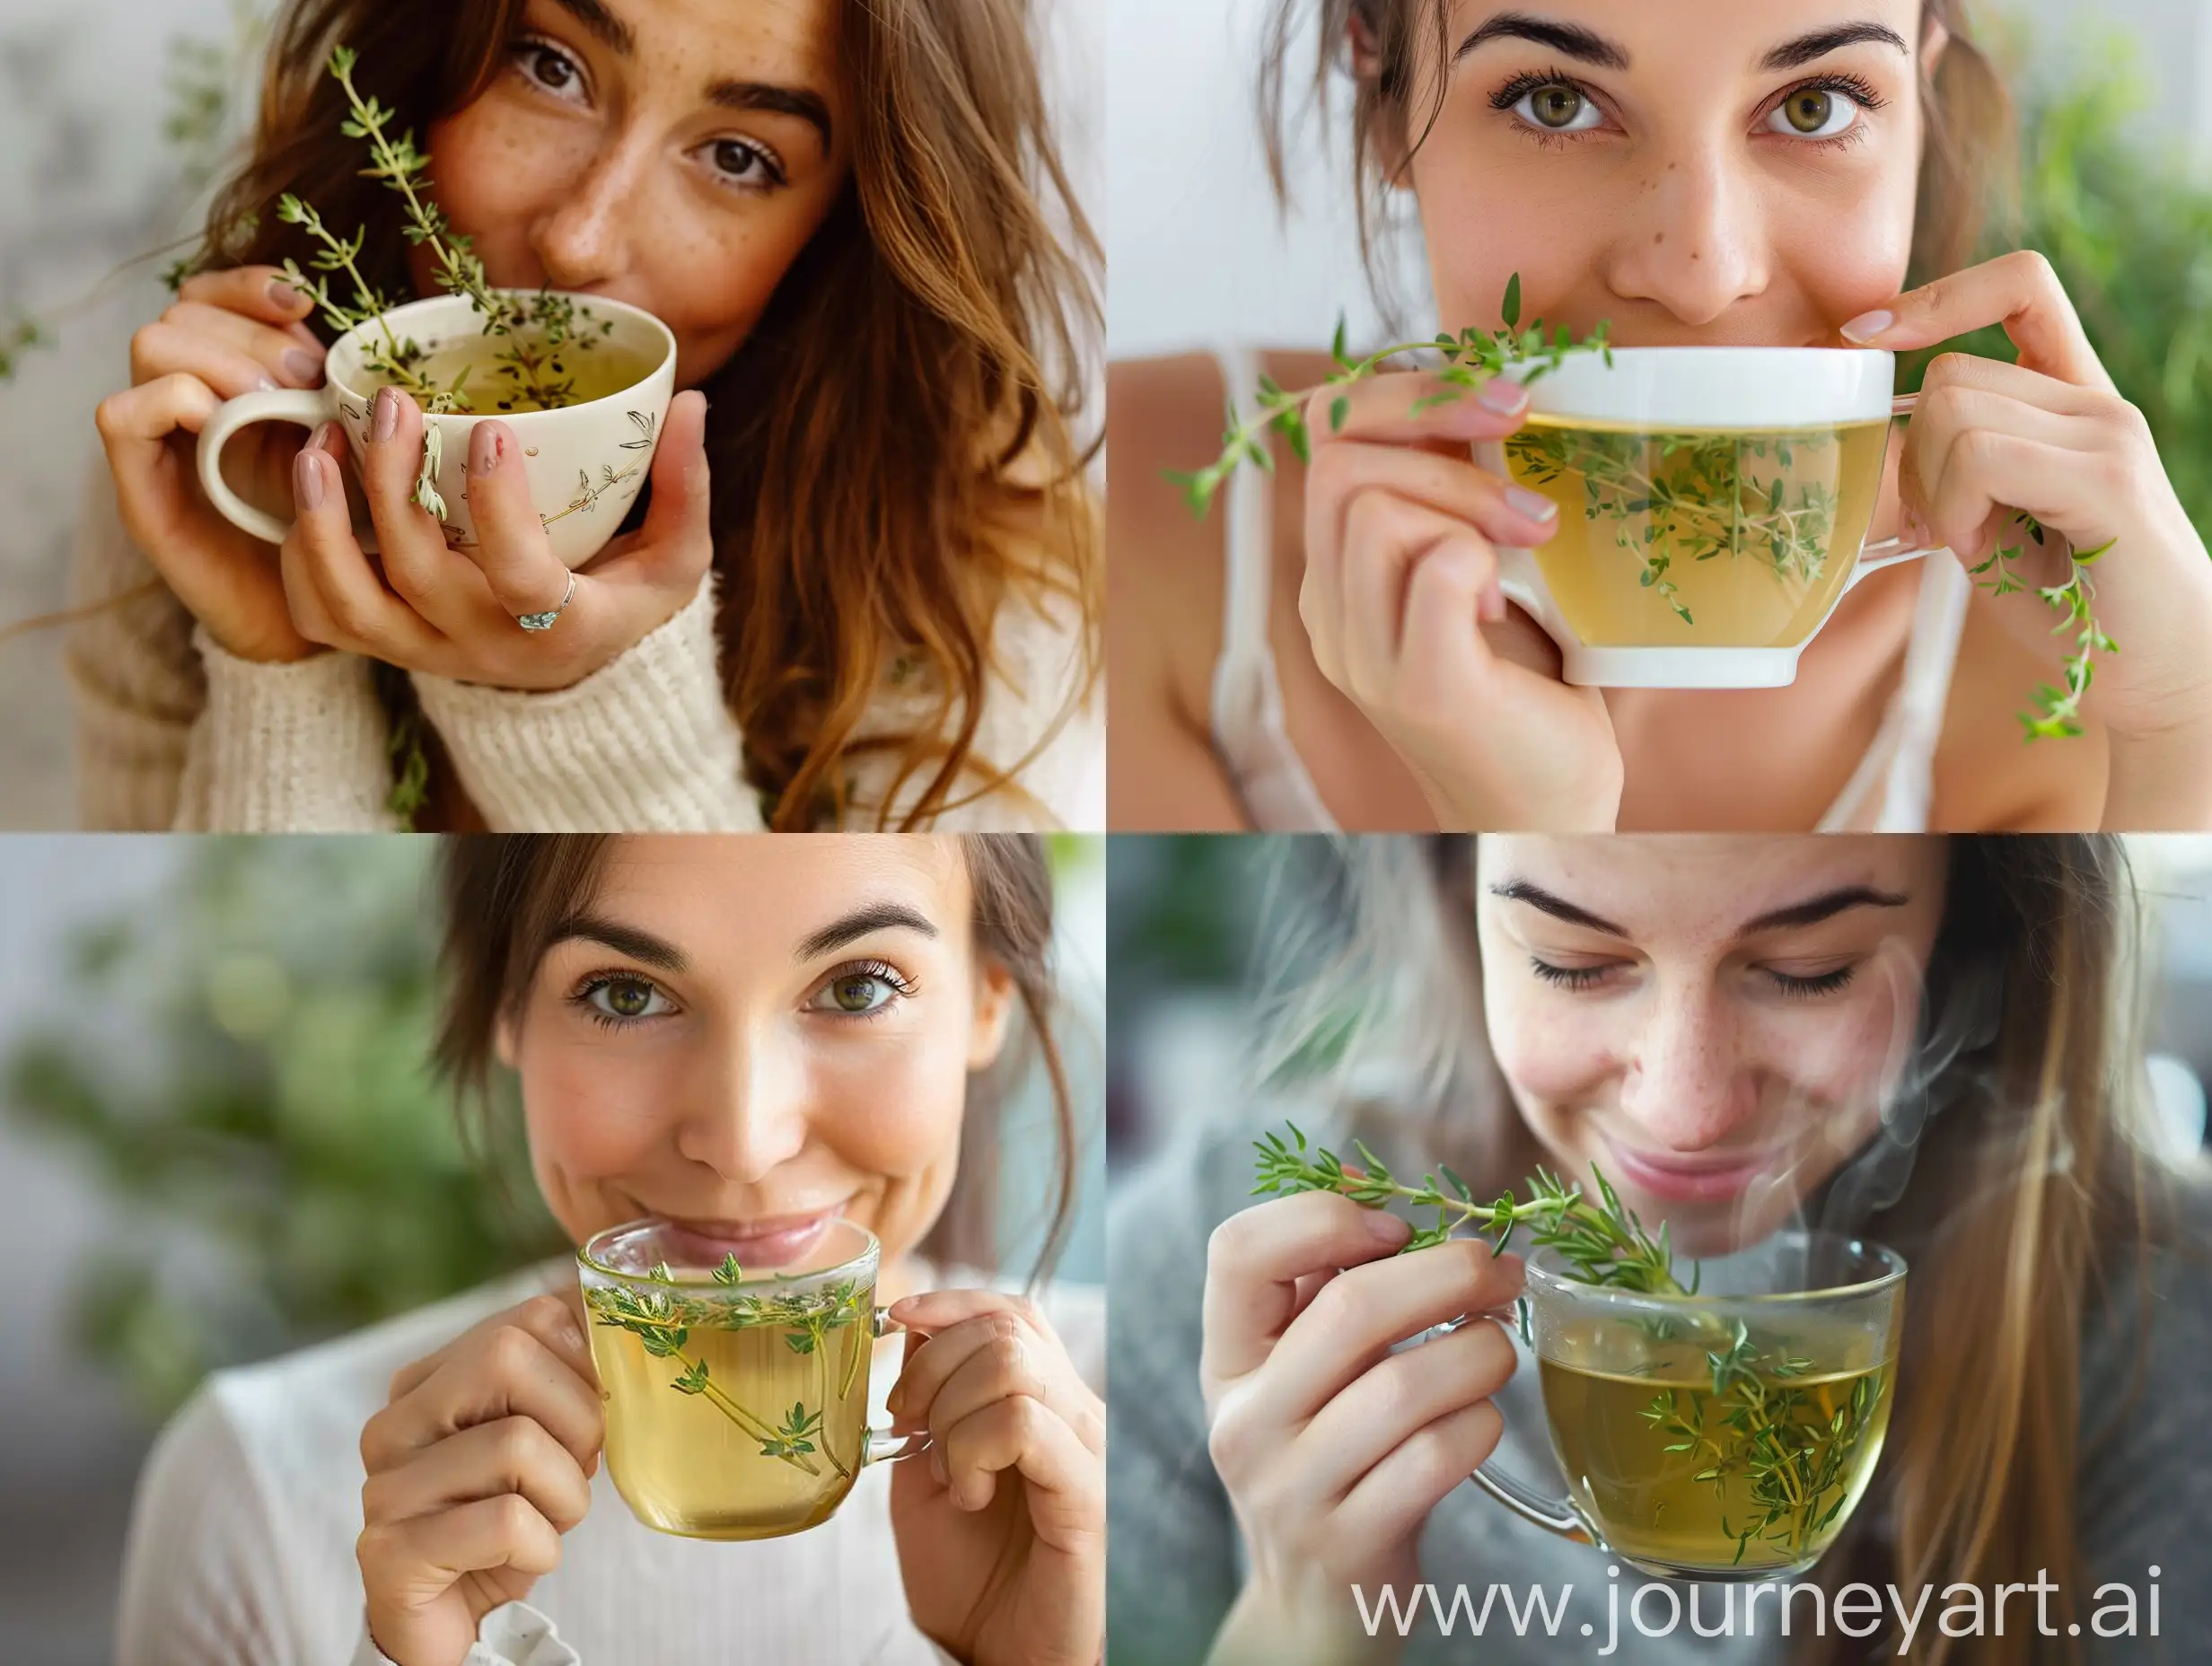 A picture of a woman drinking thyme tea